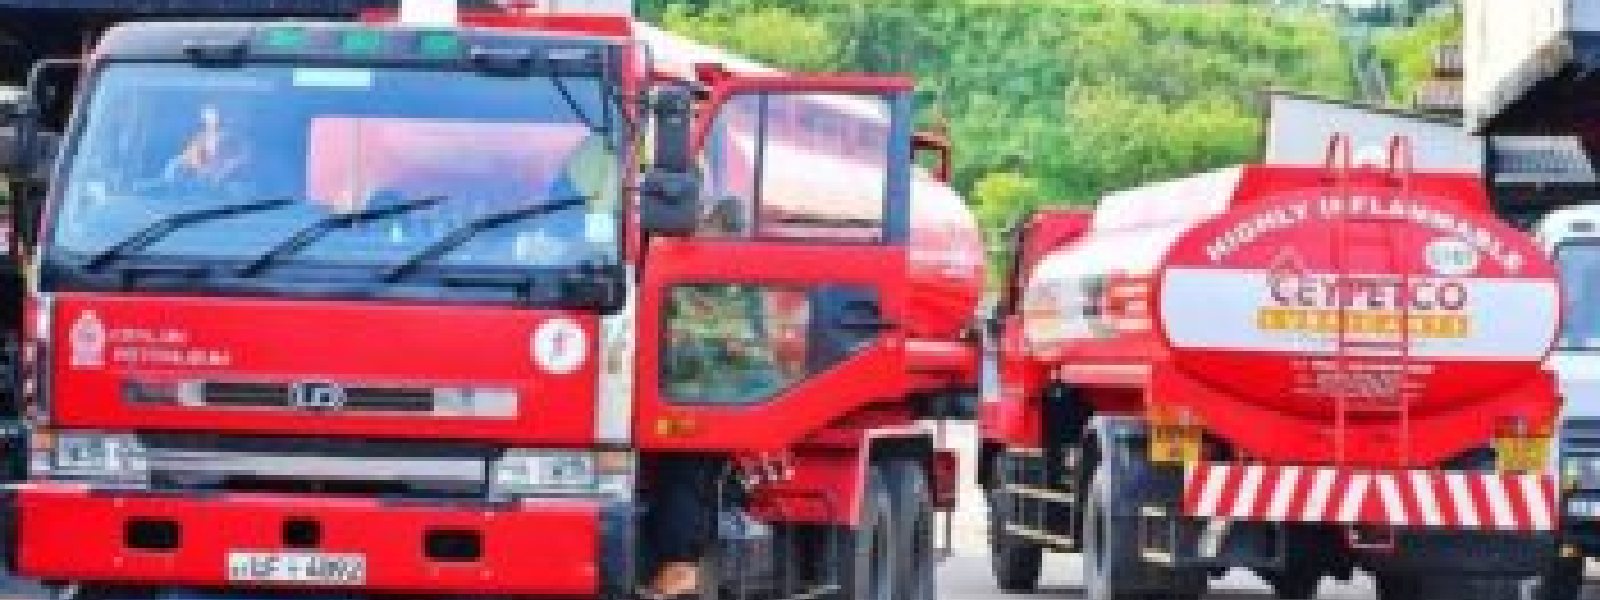 4,000 MT of Diesel distributed on Friday (22)